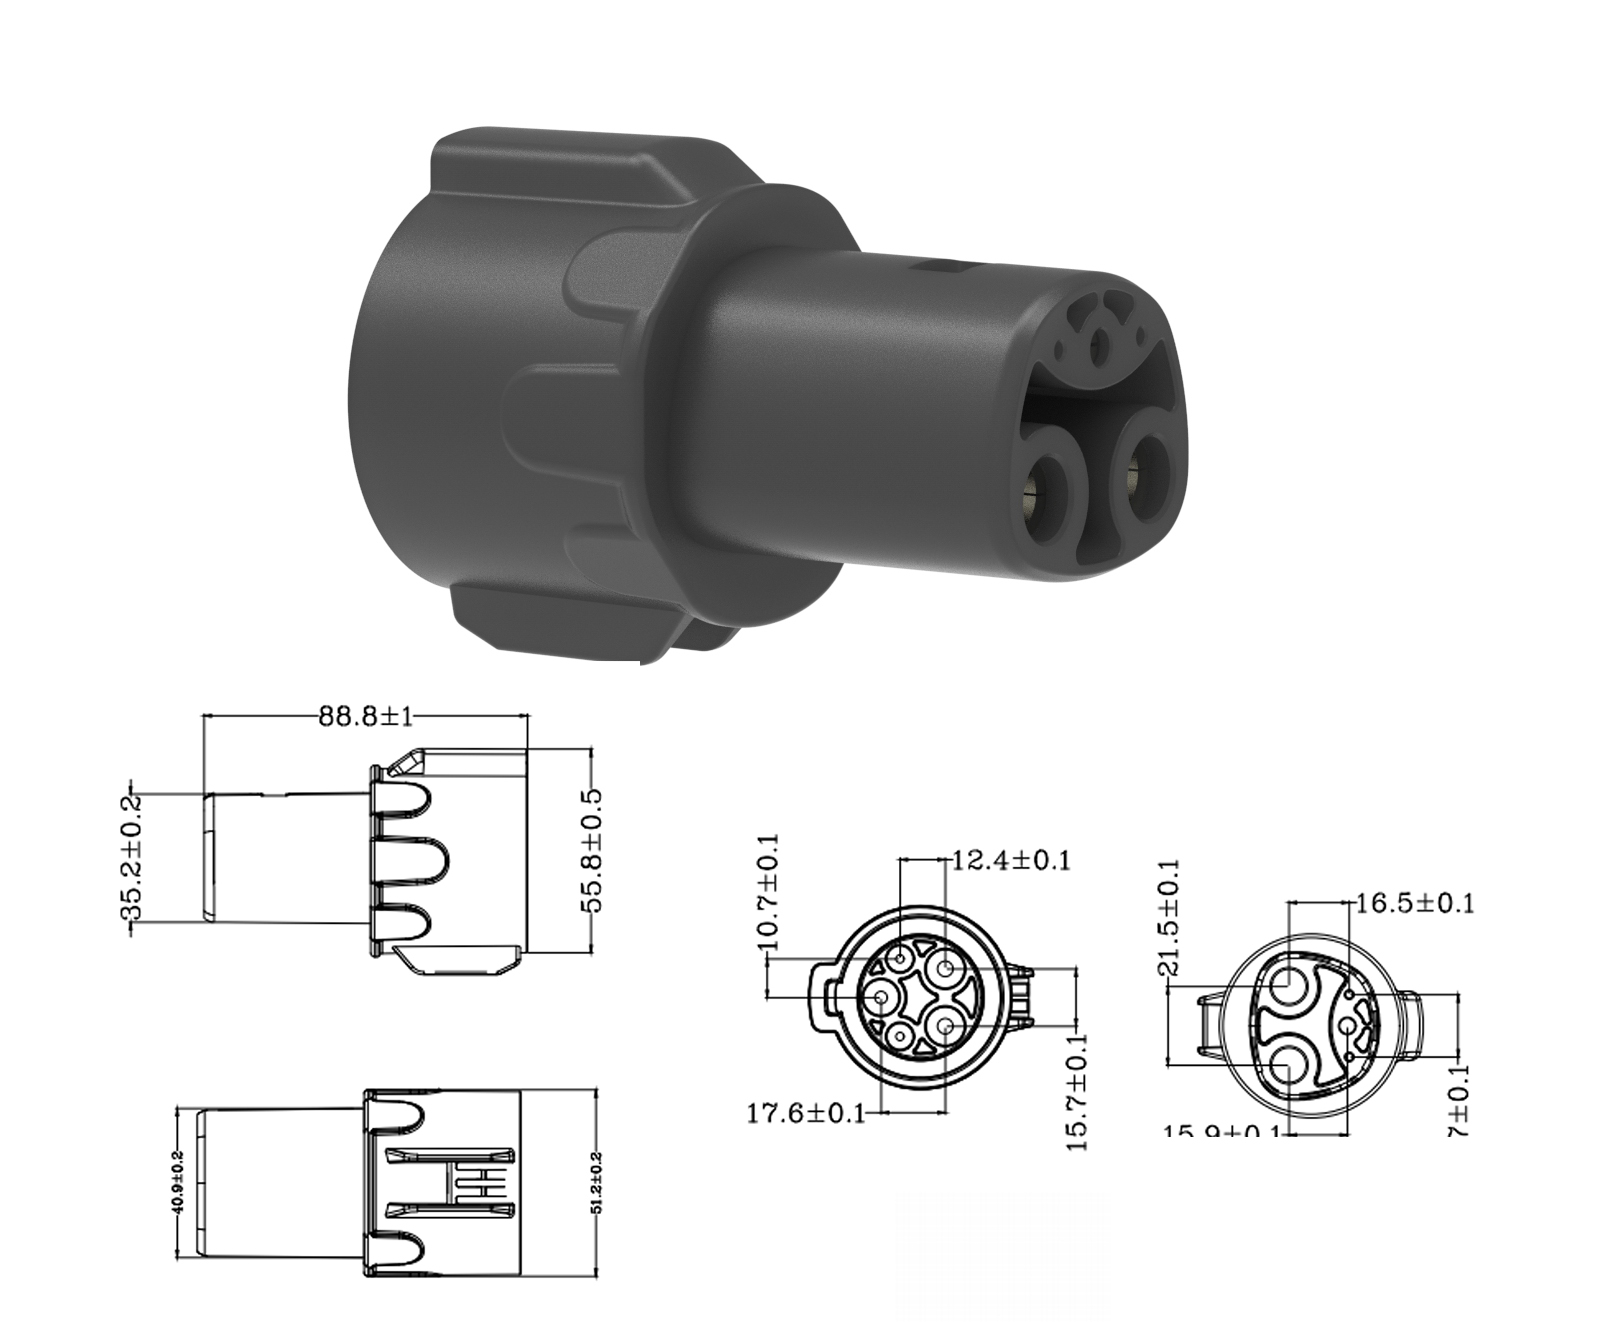 Ev Charger Adapter To Tesla， Ev Charger To Tesla Adapter，J1722 Adapter，J1722 Adapter to Telsa,J1722  to Telsa Adapter, Telsa adapter, type 1 to Telsa adapter, Ev Charging Adapters， Ev Charger Adapter，Ev Charger Adapter Typers
Ev Charger Adapter Cord，Ev Charger With Adapters，Ev Charger Adapter Kit，Electric Car Charger Adapter，Ev Plug Adapter，Electric Car Charger Adapter Plug，Ev Charger Plug Adapter，Ev Car Charger Adapter，Electric Car Plug Adapter，Adapter For Electric Car Charger，Electric Vehicle Charging Adapter，Ev Charge Adapter，Electric Charger Adapter，Electric Vehicle Adapters，Charge Point Adapter，Electric Vehicle Charging Adapters，444